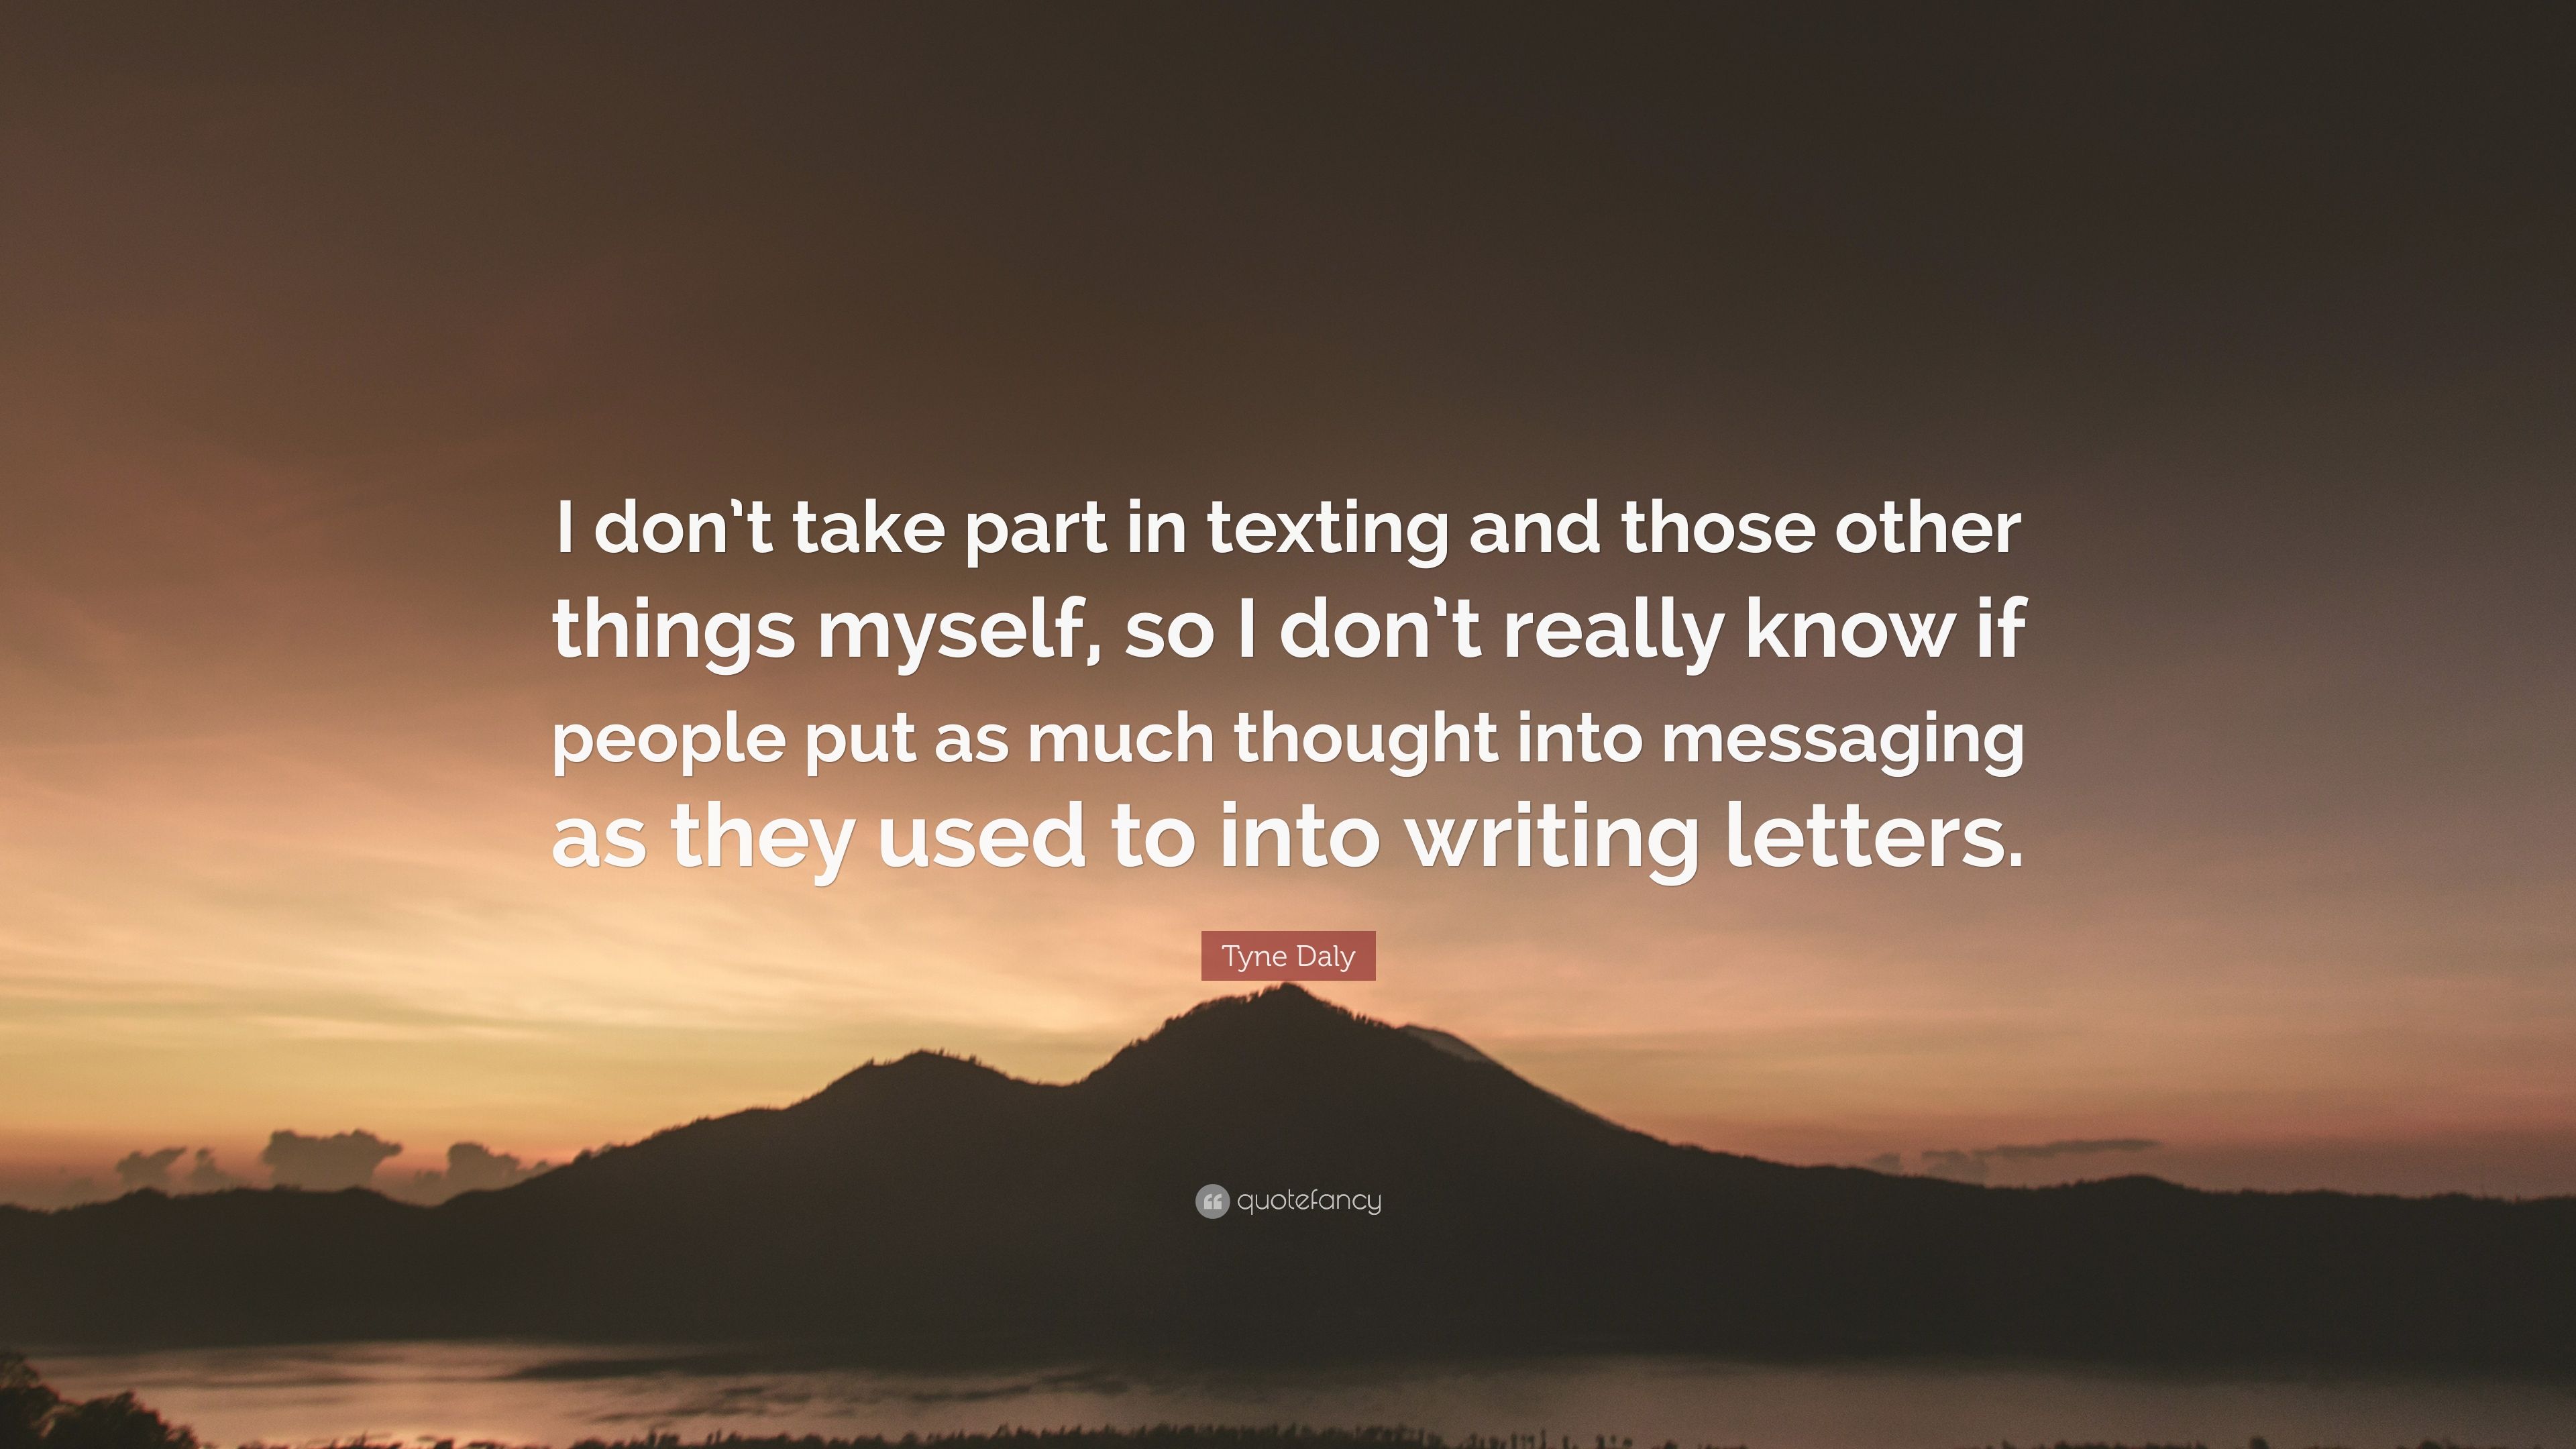 Tyne Daly Quote: “I don't take part in texting and those other